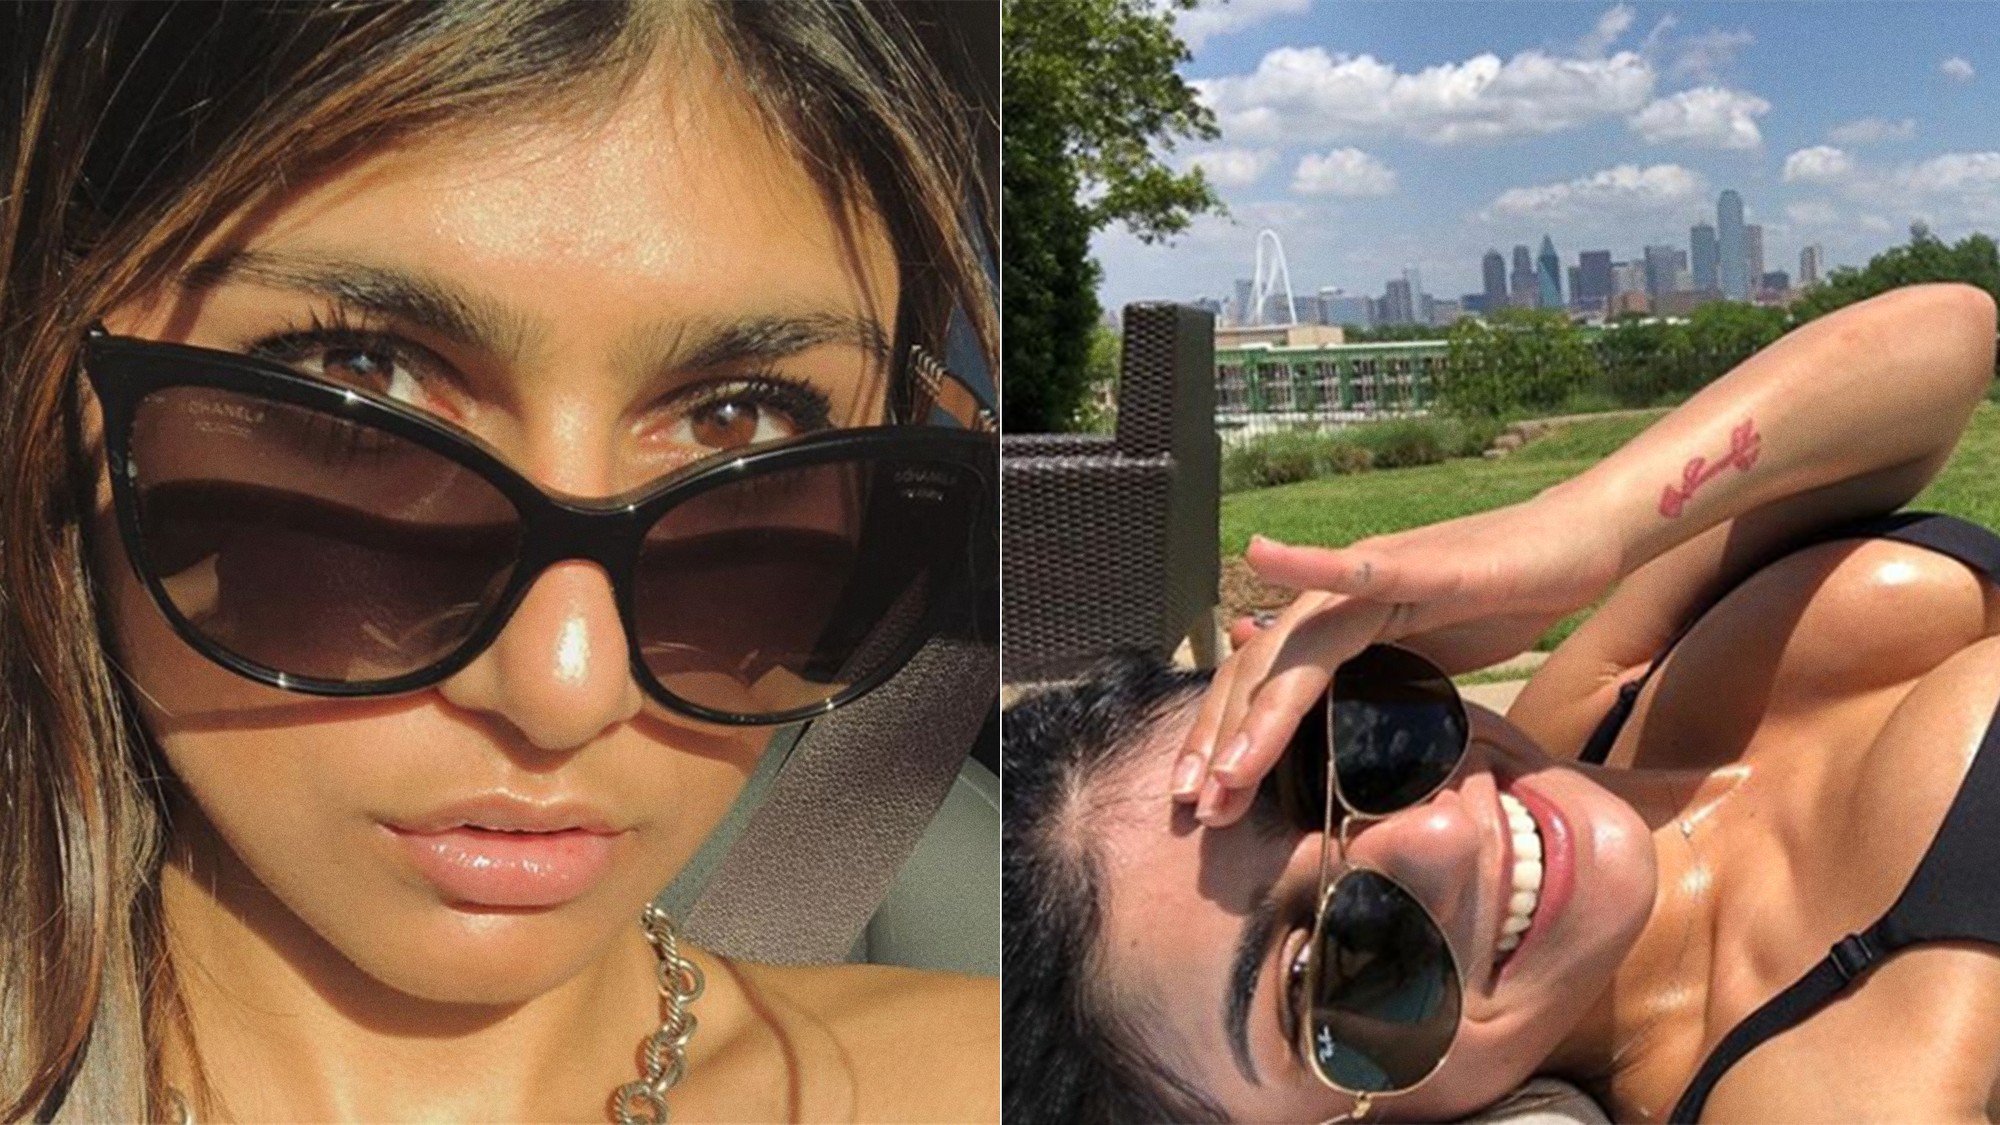 Middle Asia - Mia Khalifa Only Did Porn Three Months But She's Still a ...